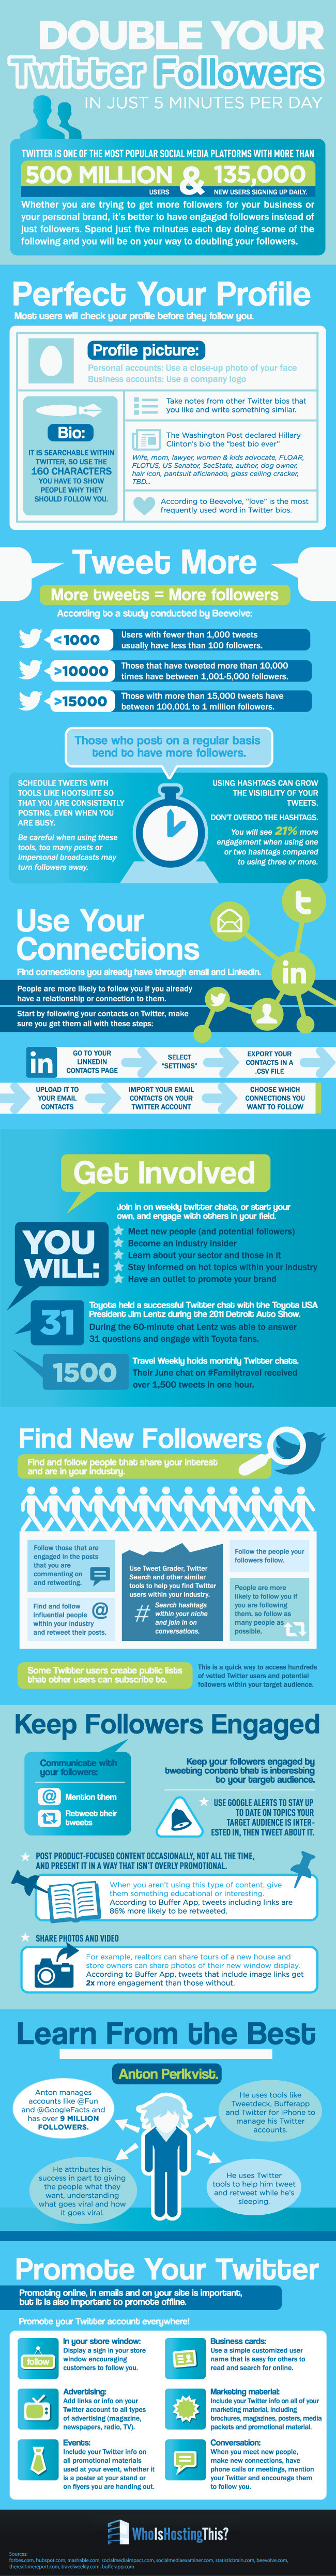 Double Twitter Followers Organically In Just 5 Minutes A Day [Infographic]